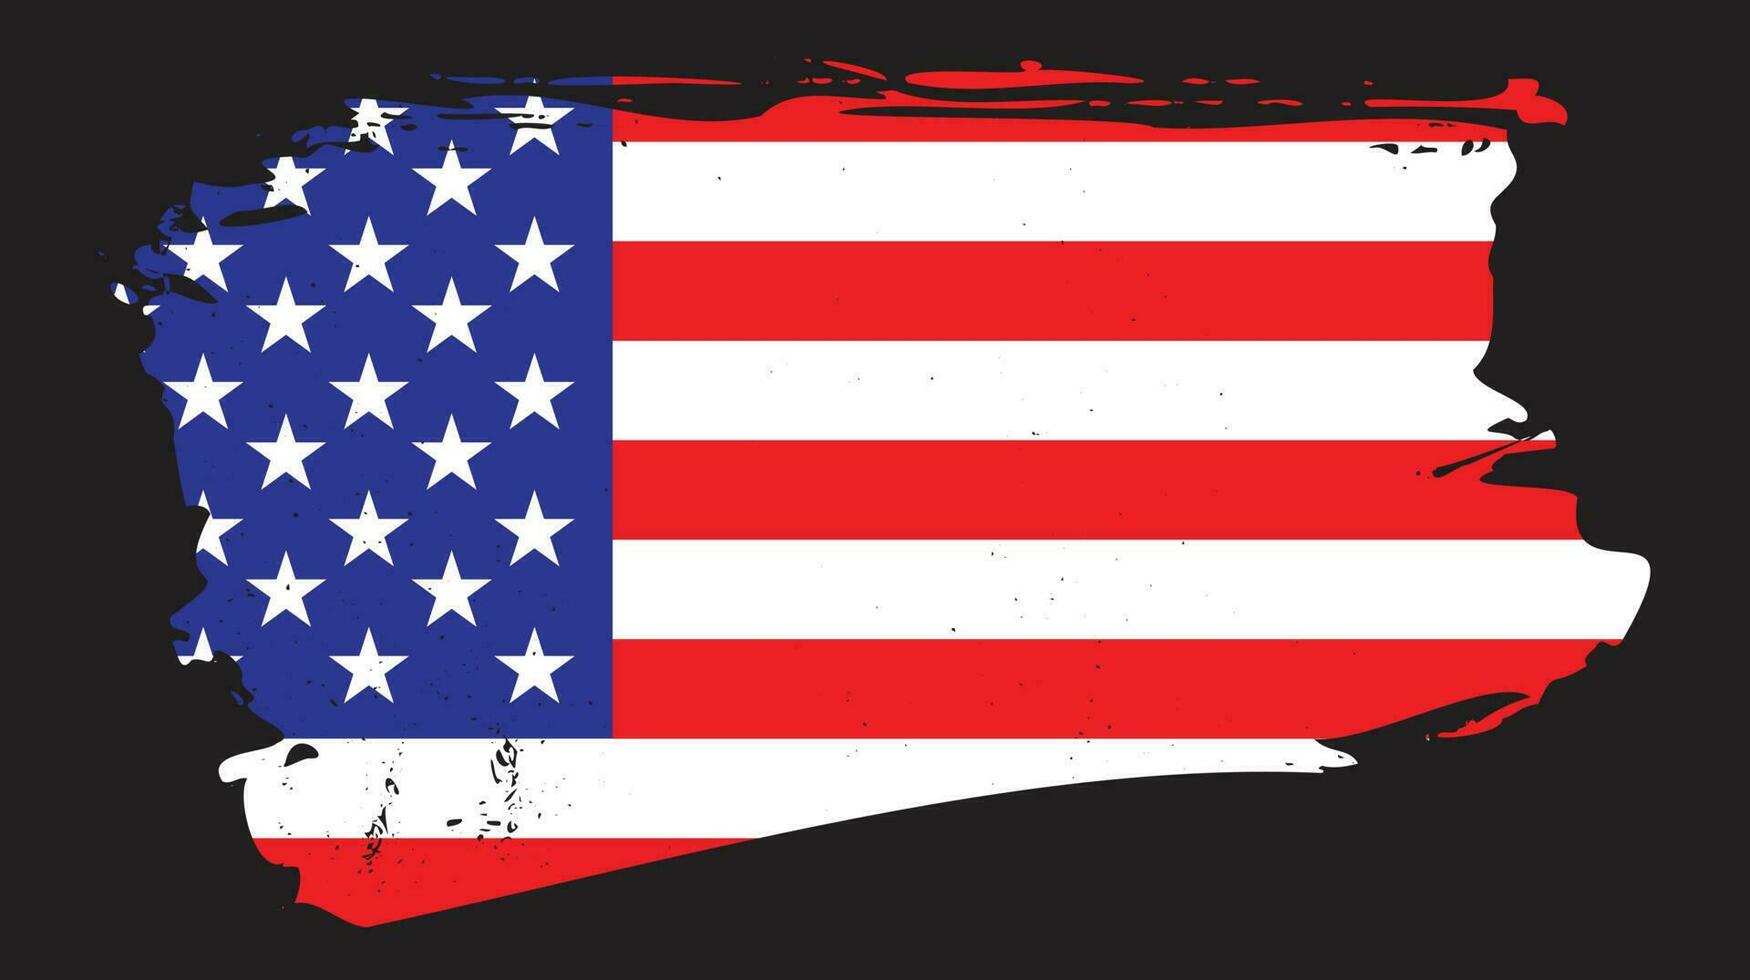 Grunge style distressed American flag vector